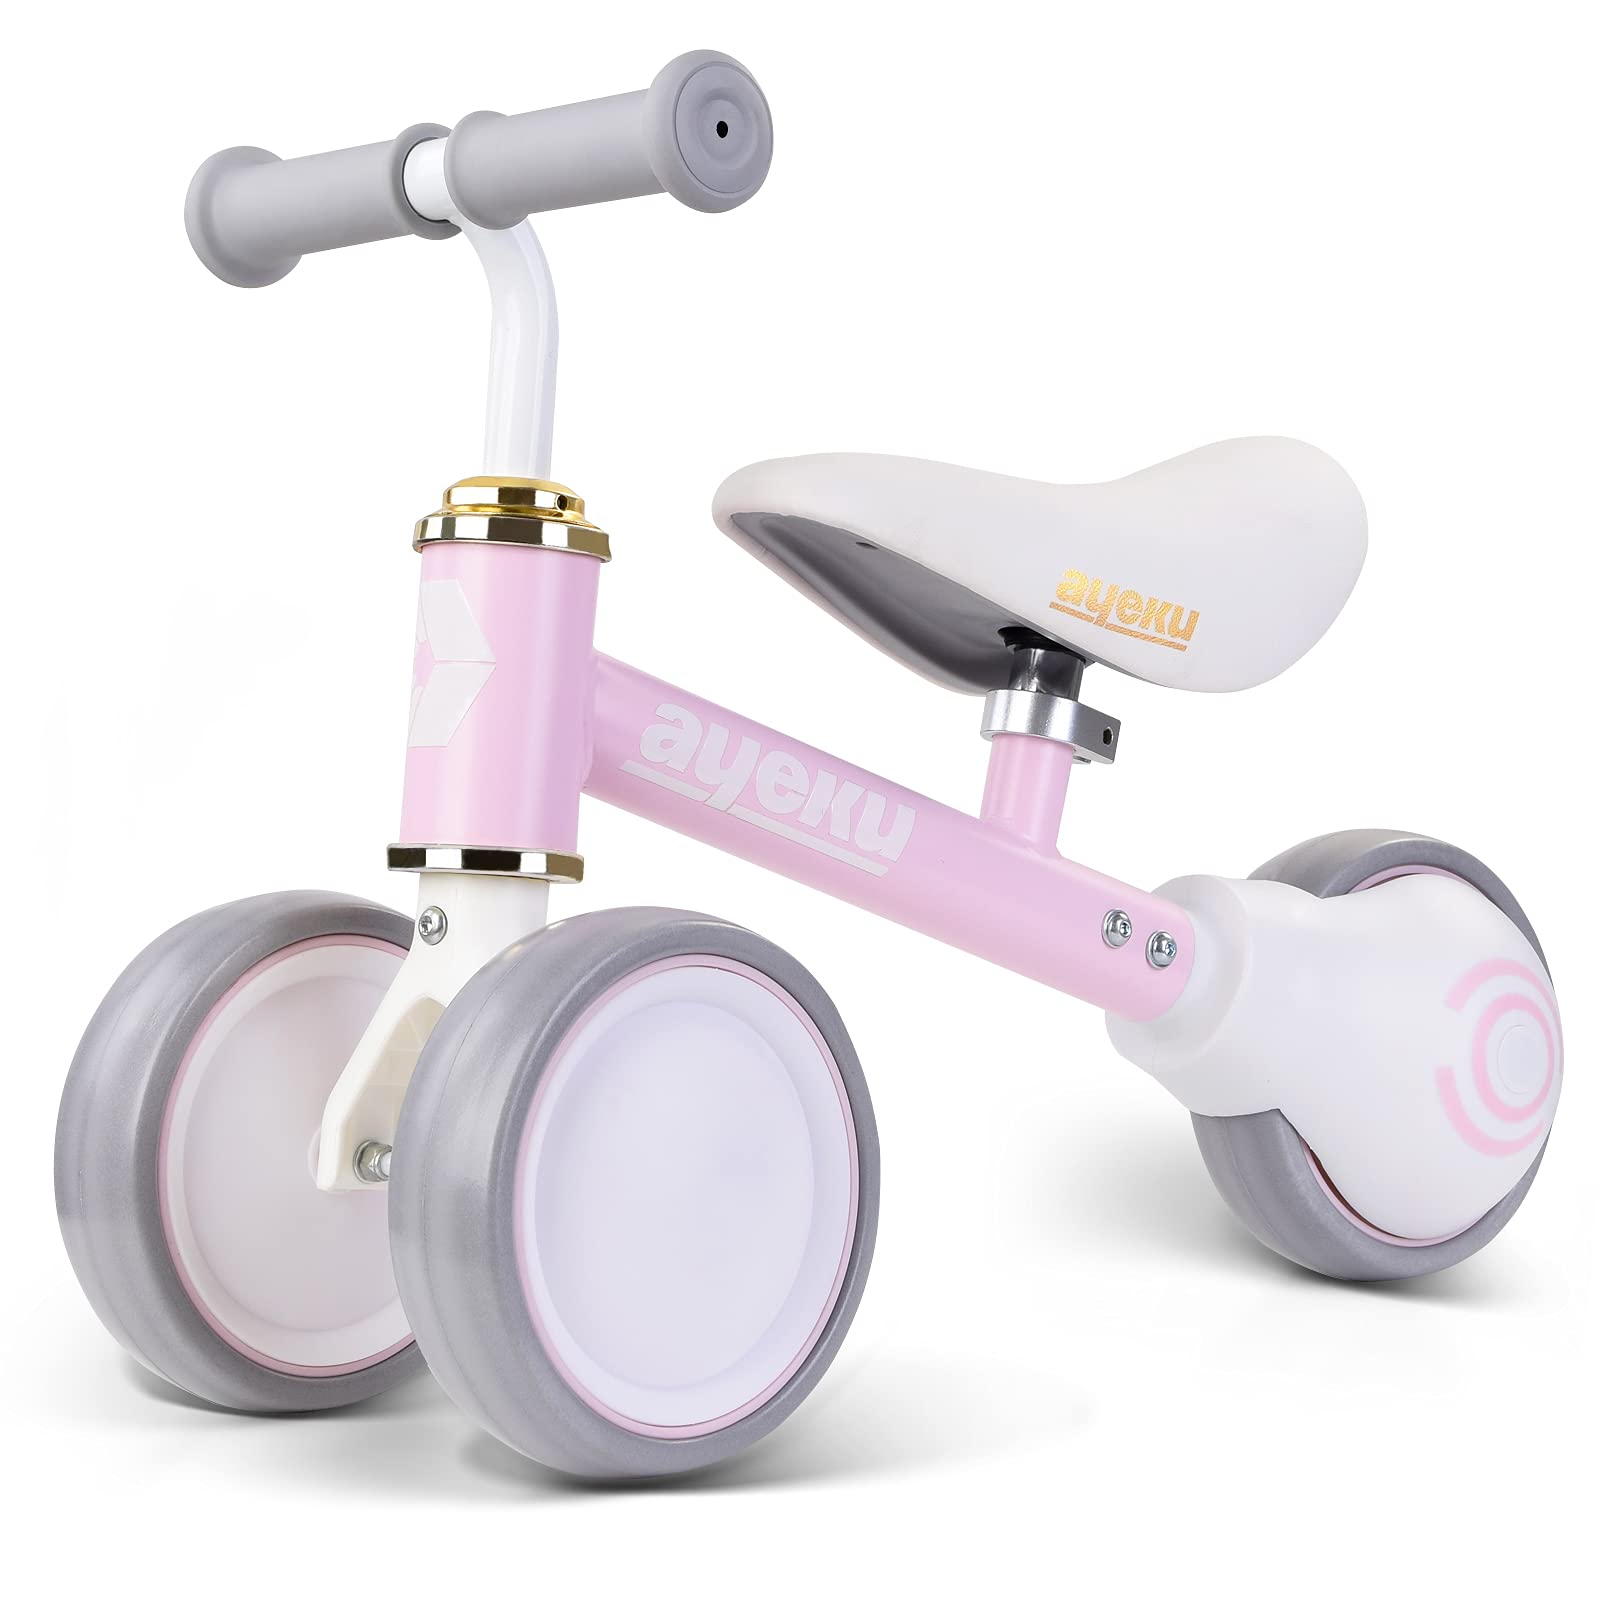 AyeKu Baby Balance Bike Cool Toys for 1 Years Old Girl Gifts 12-24 Month Toddler First Bikes Best Riding Toy 1st Birthday Gift (Pink)